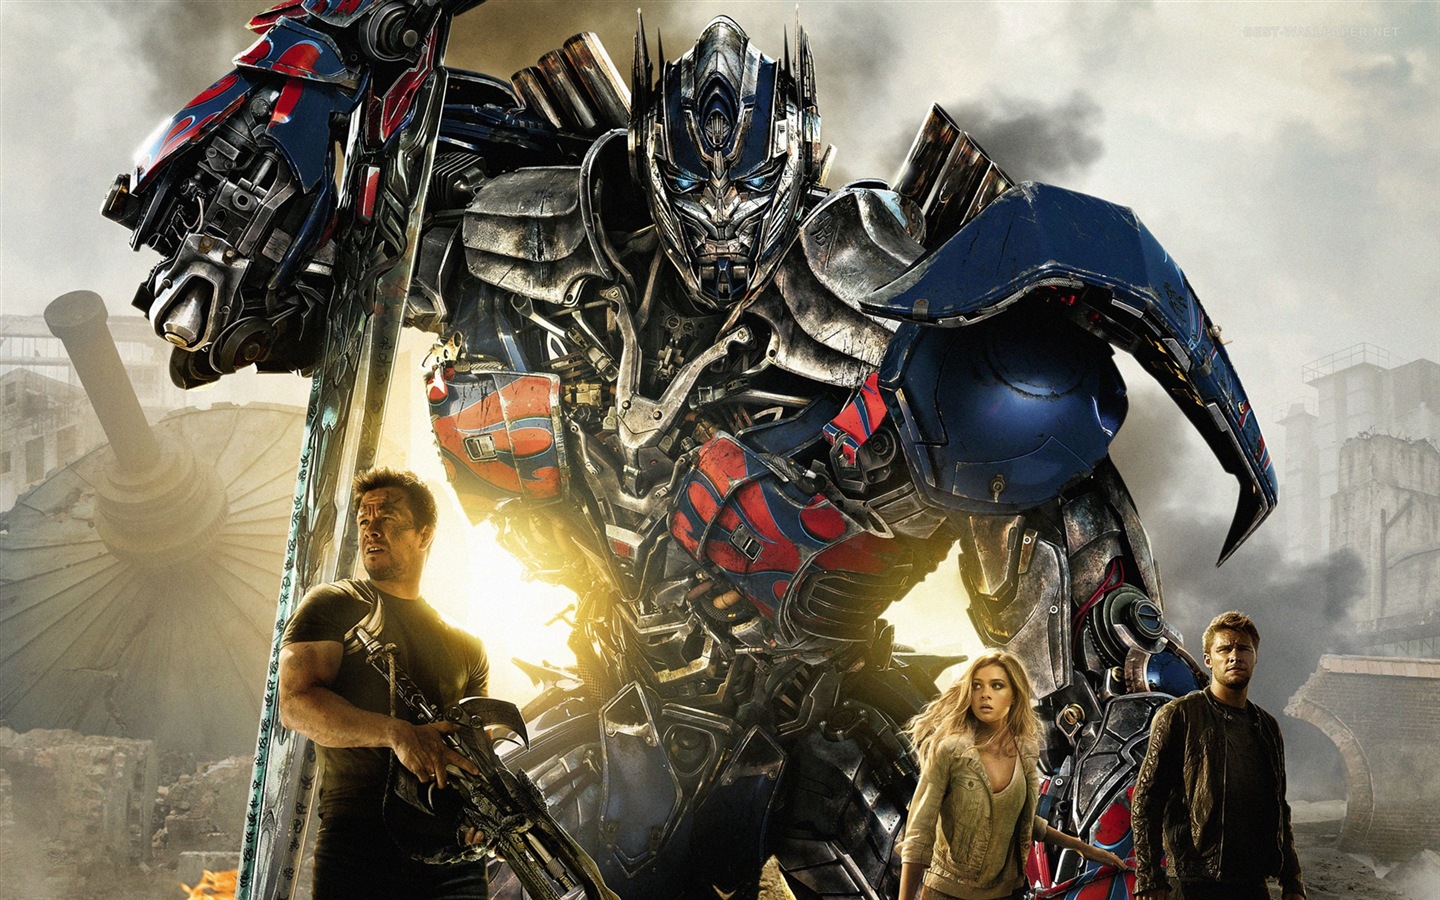 2014 Transformers: Age of Extinction HD tapety #1 - 1440x900